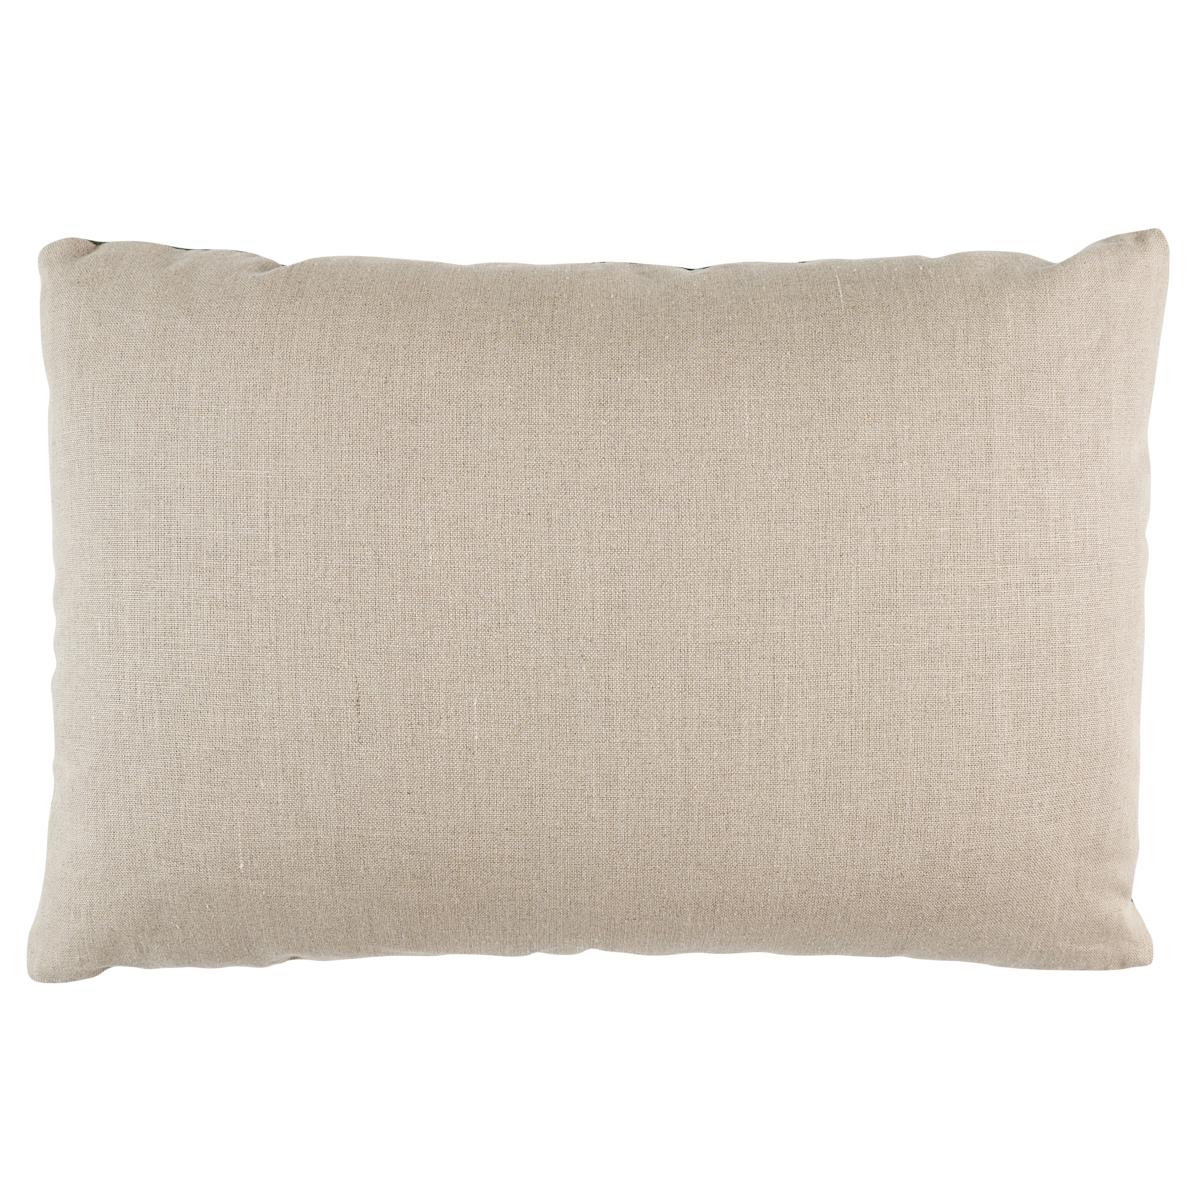 This pillow features Embroidered Tile by David Kaihoi for Schumacher with a knife edge finish. Dense fields of embroidery capture the deep, mysterious quality of glazed ceramic and give this David Kaihoi–designed linen fabric in green a surprising